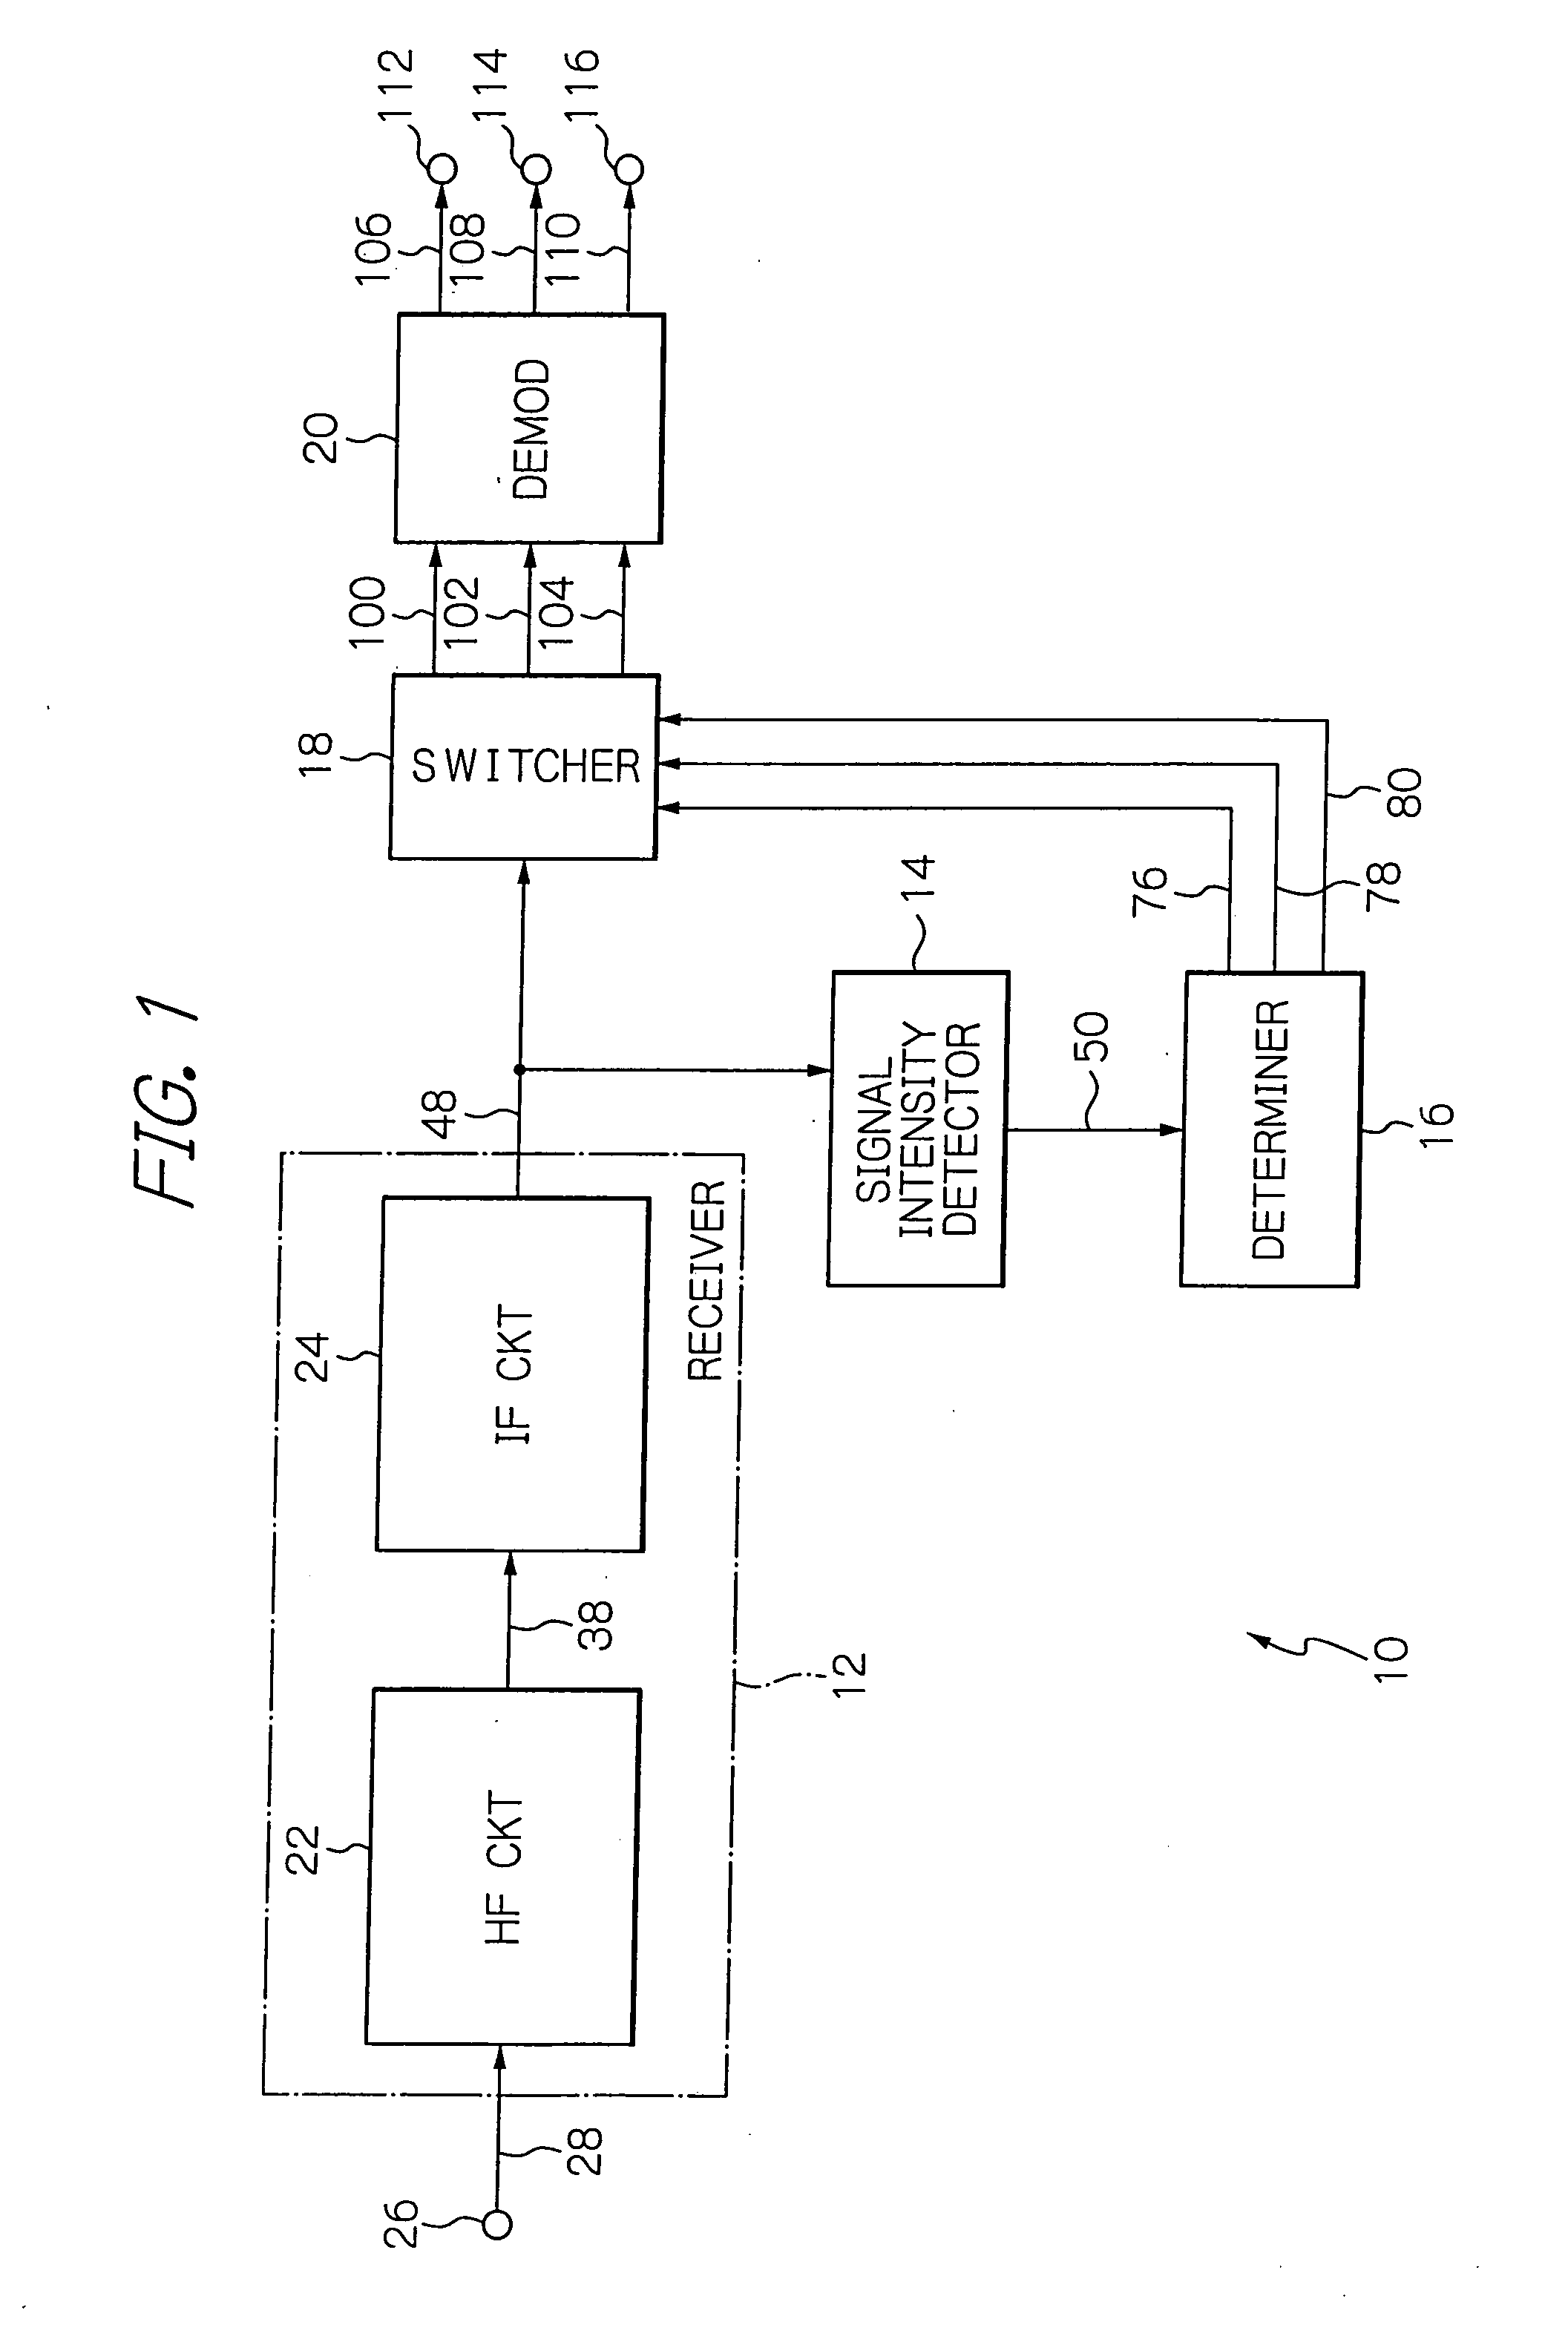 Multi-mode receiver circuit for dealing with various modulation systems and signal formats